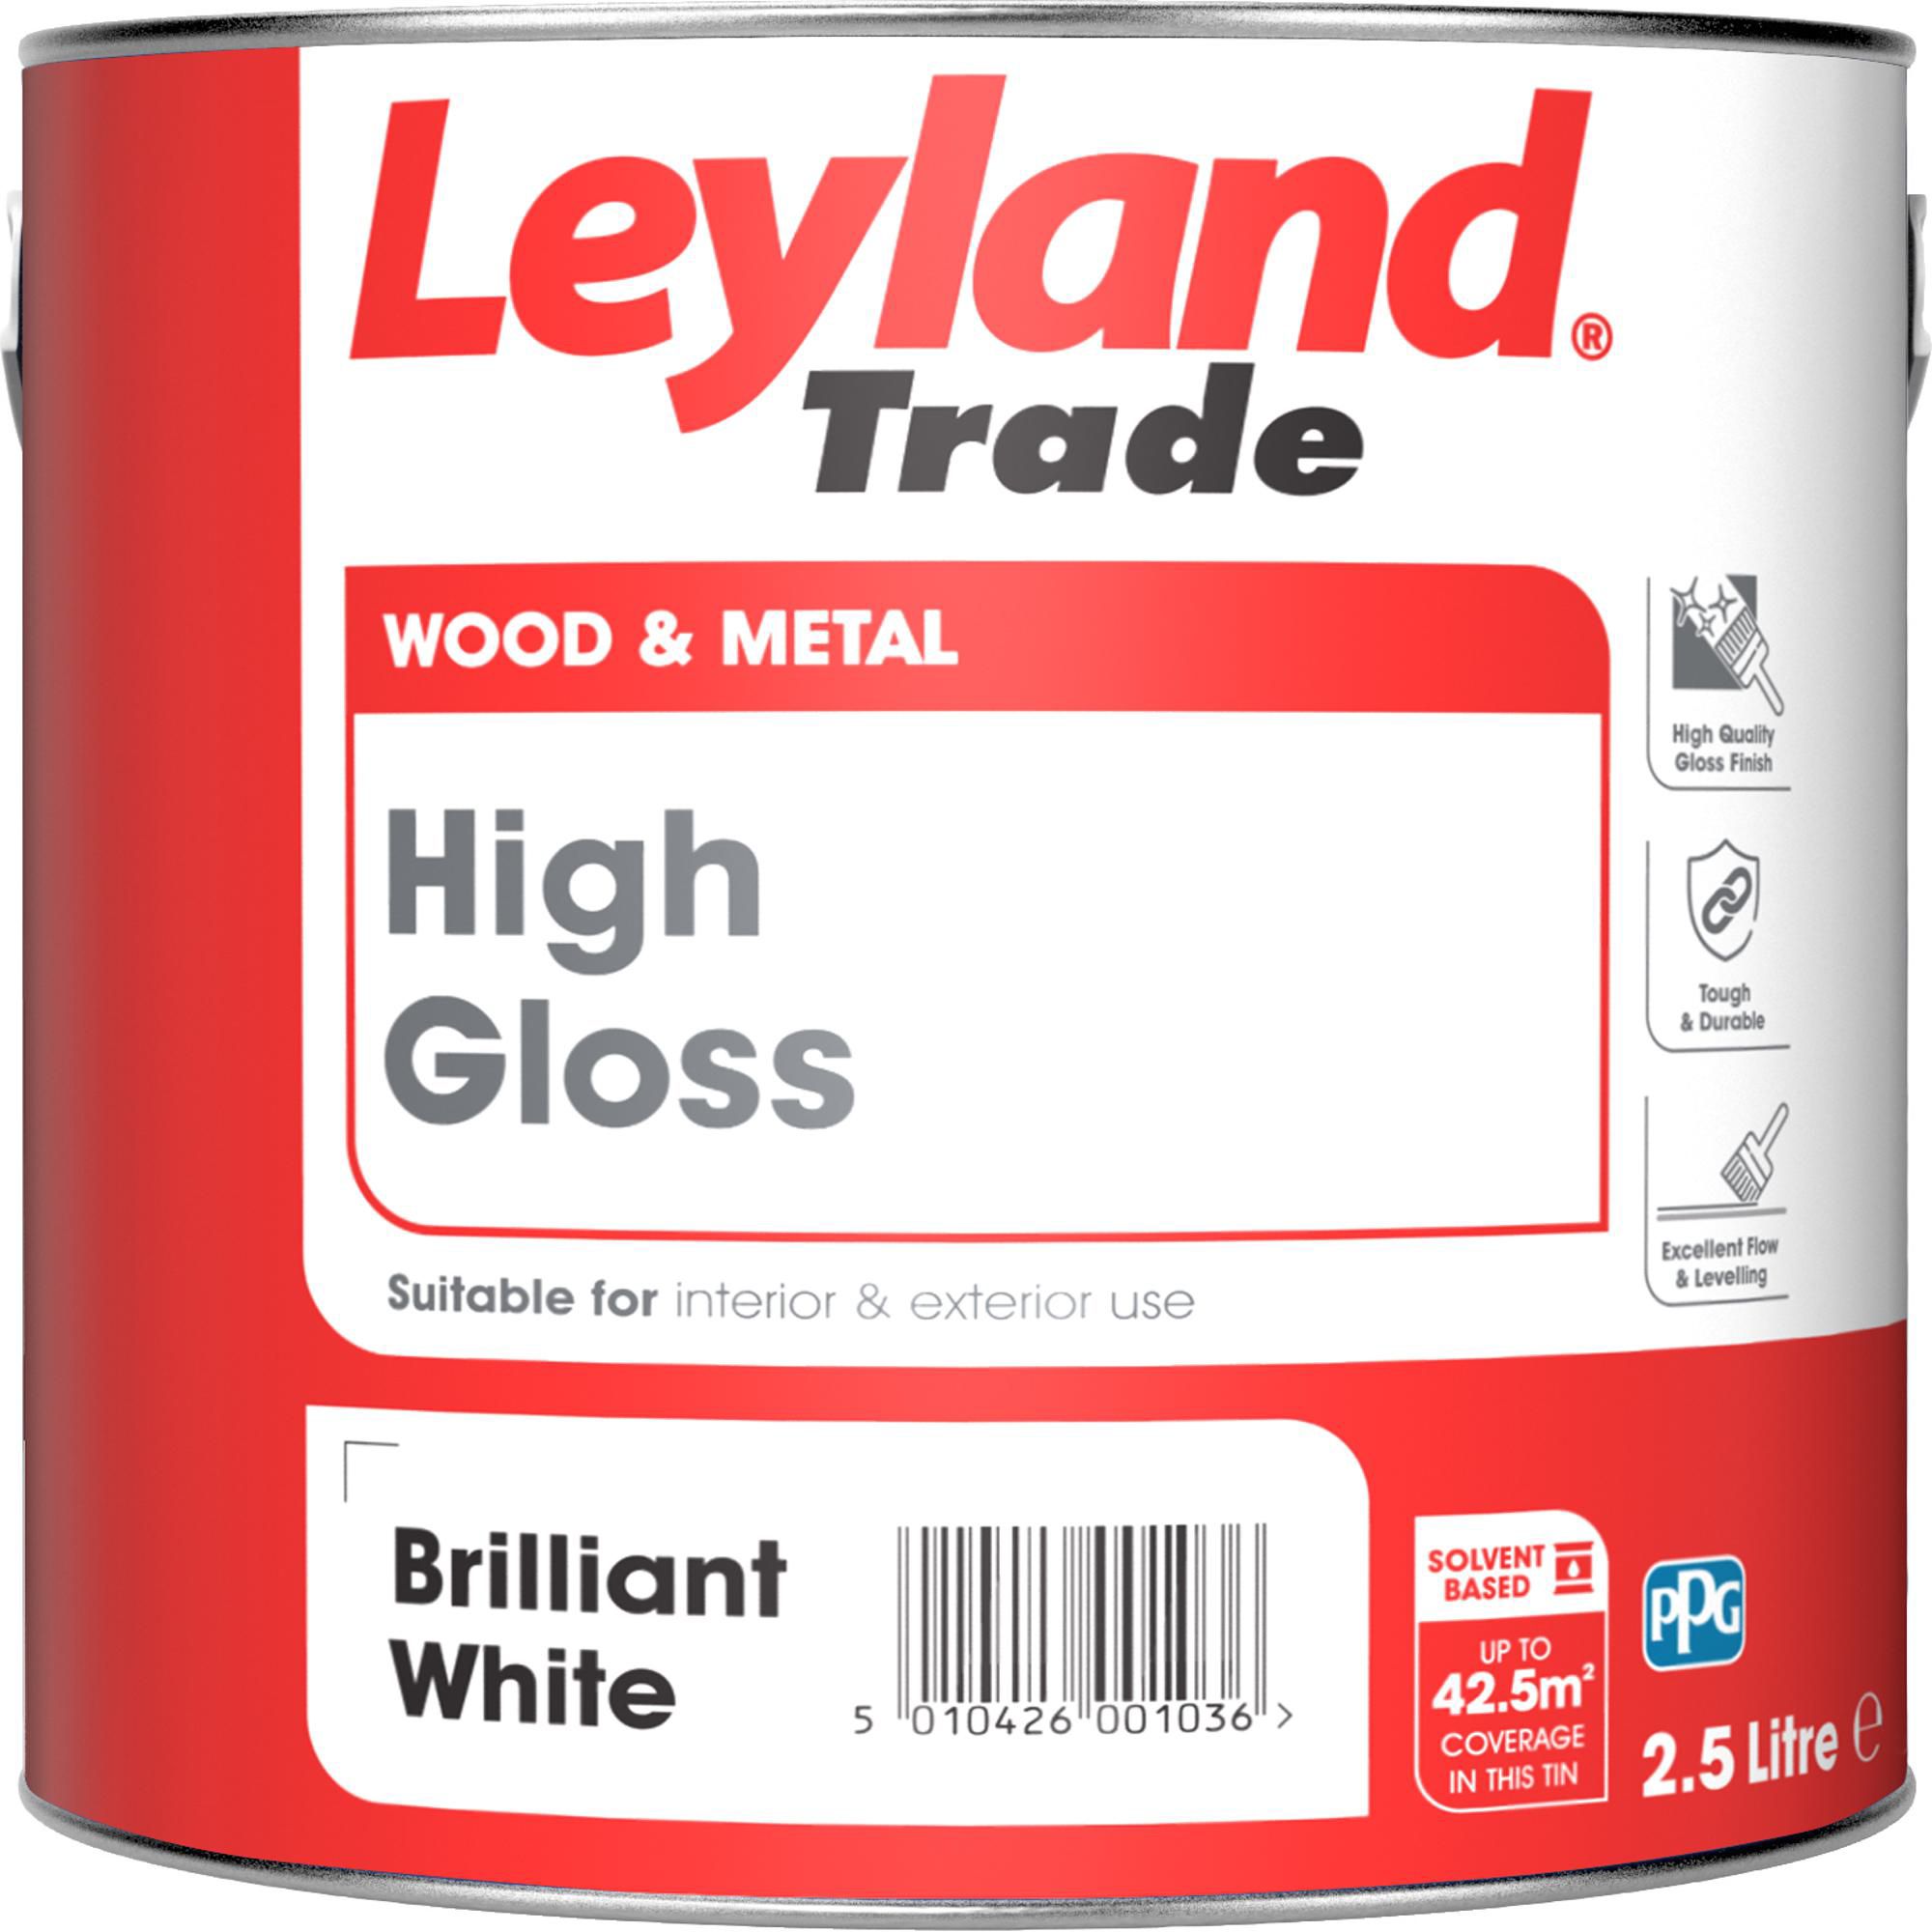 Leyland Trade Pure brilliant white Gloss Metal & wood paint, 2.5L